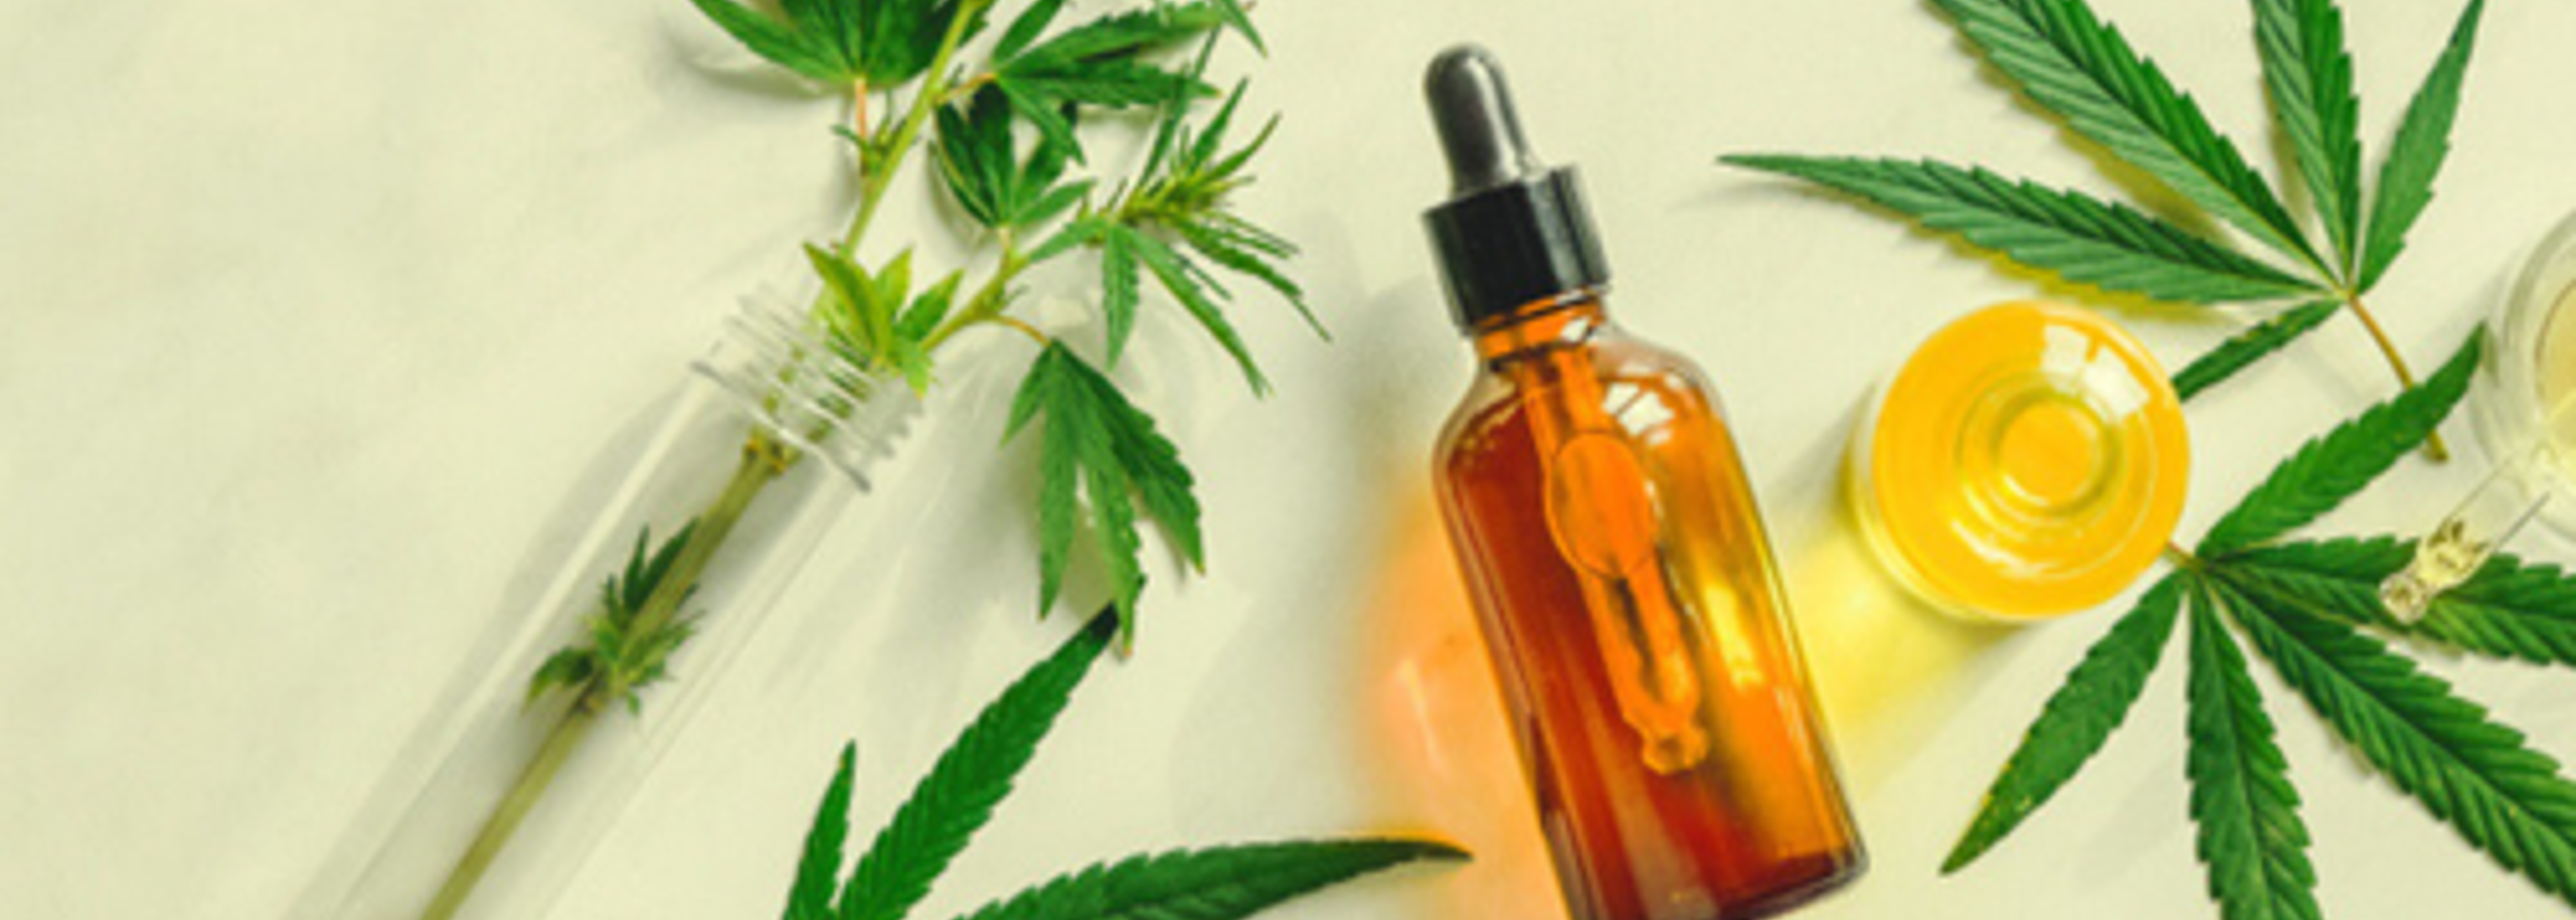 FSA reduces recommended safe daily dose of CBD by over 80%